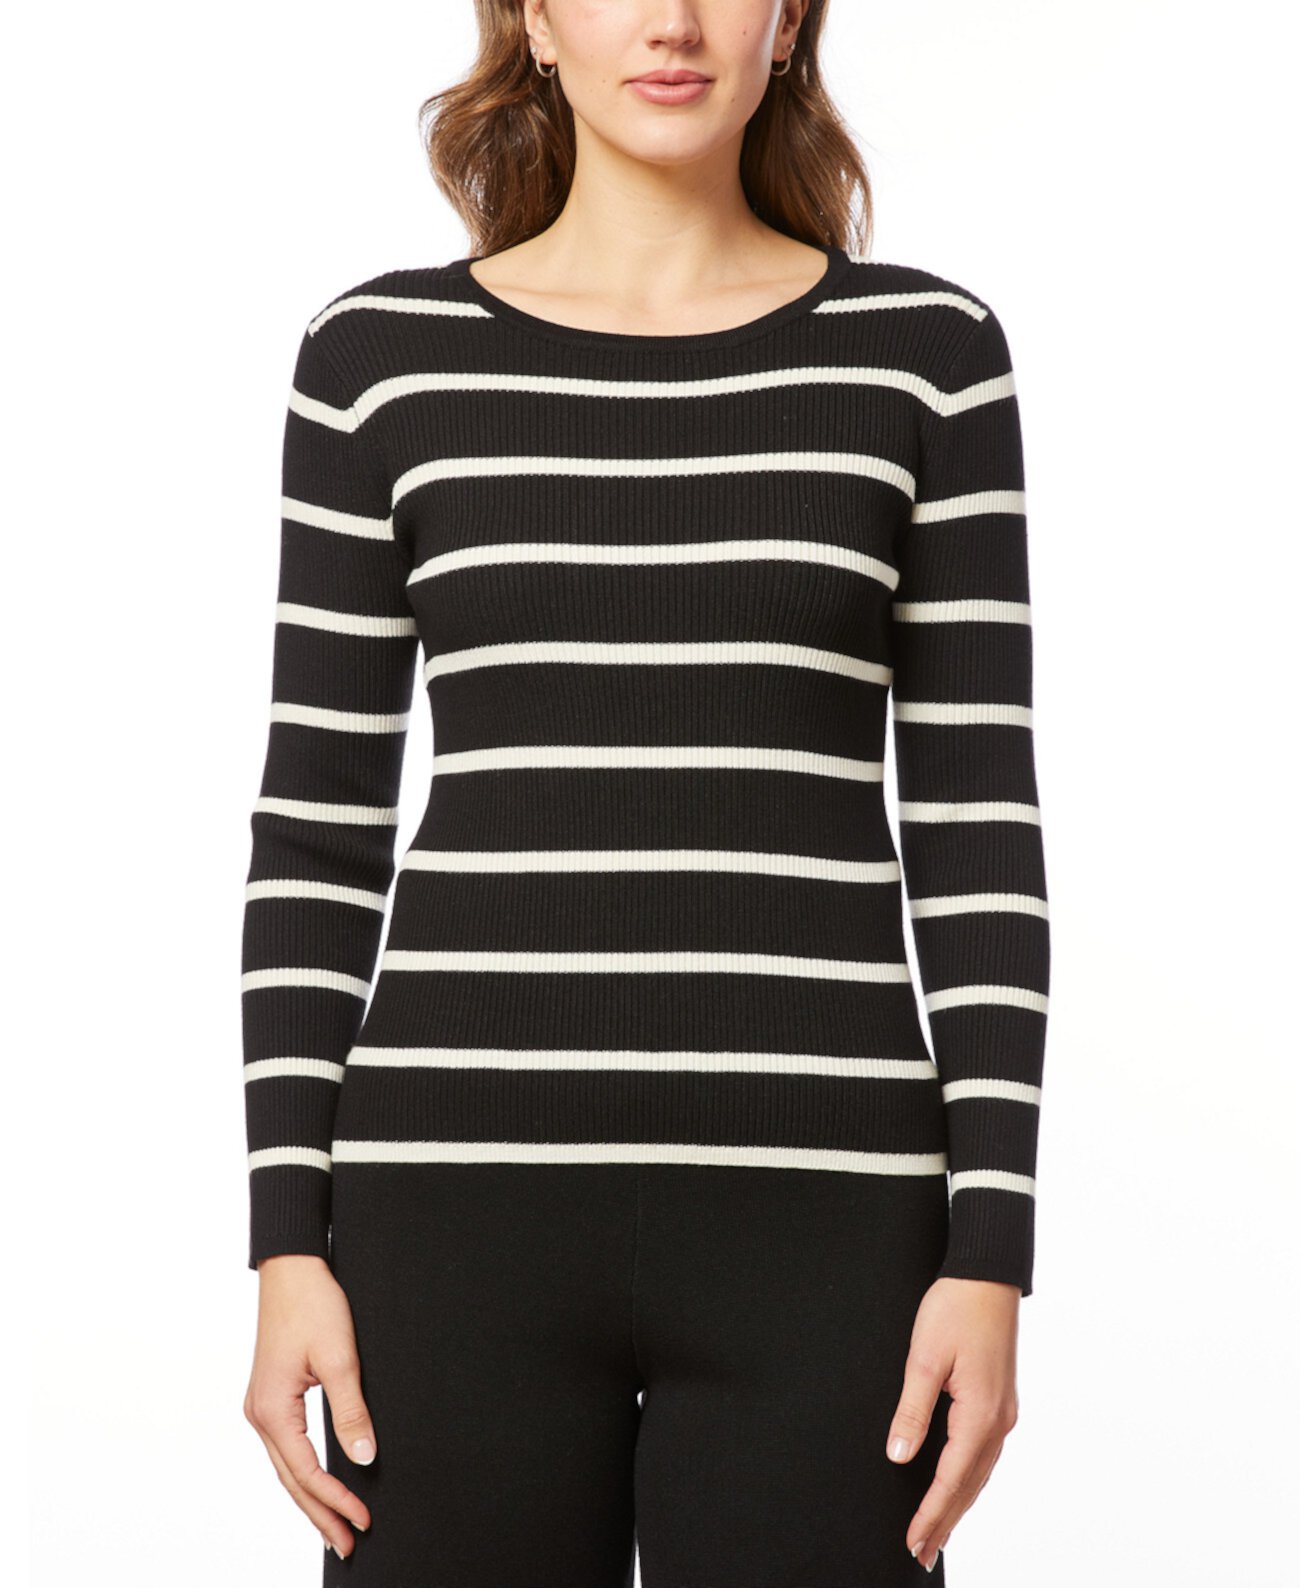 Women's Scoop Neck Ribbed Striped Sweater MELISSA PAIGE